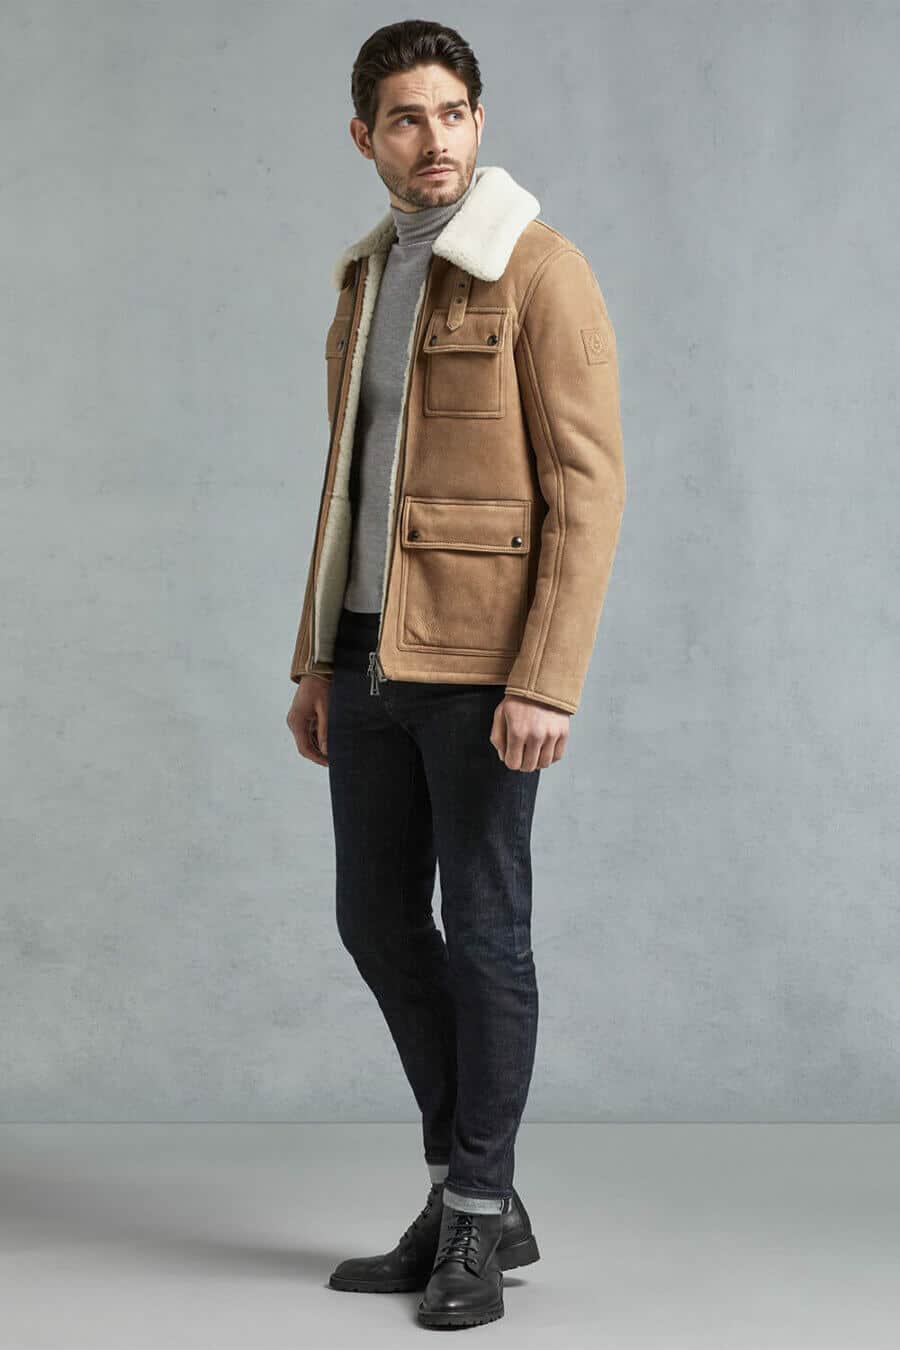 Men's military inspired turtleneck outfit with shearling jacket, jeans and boots